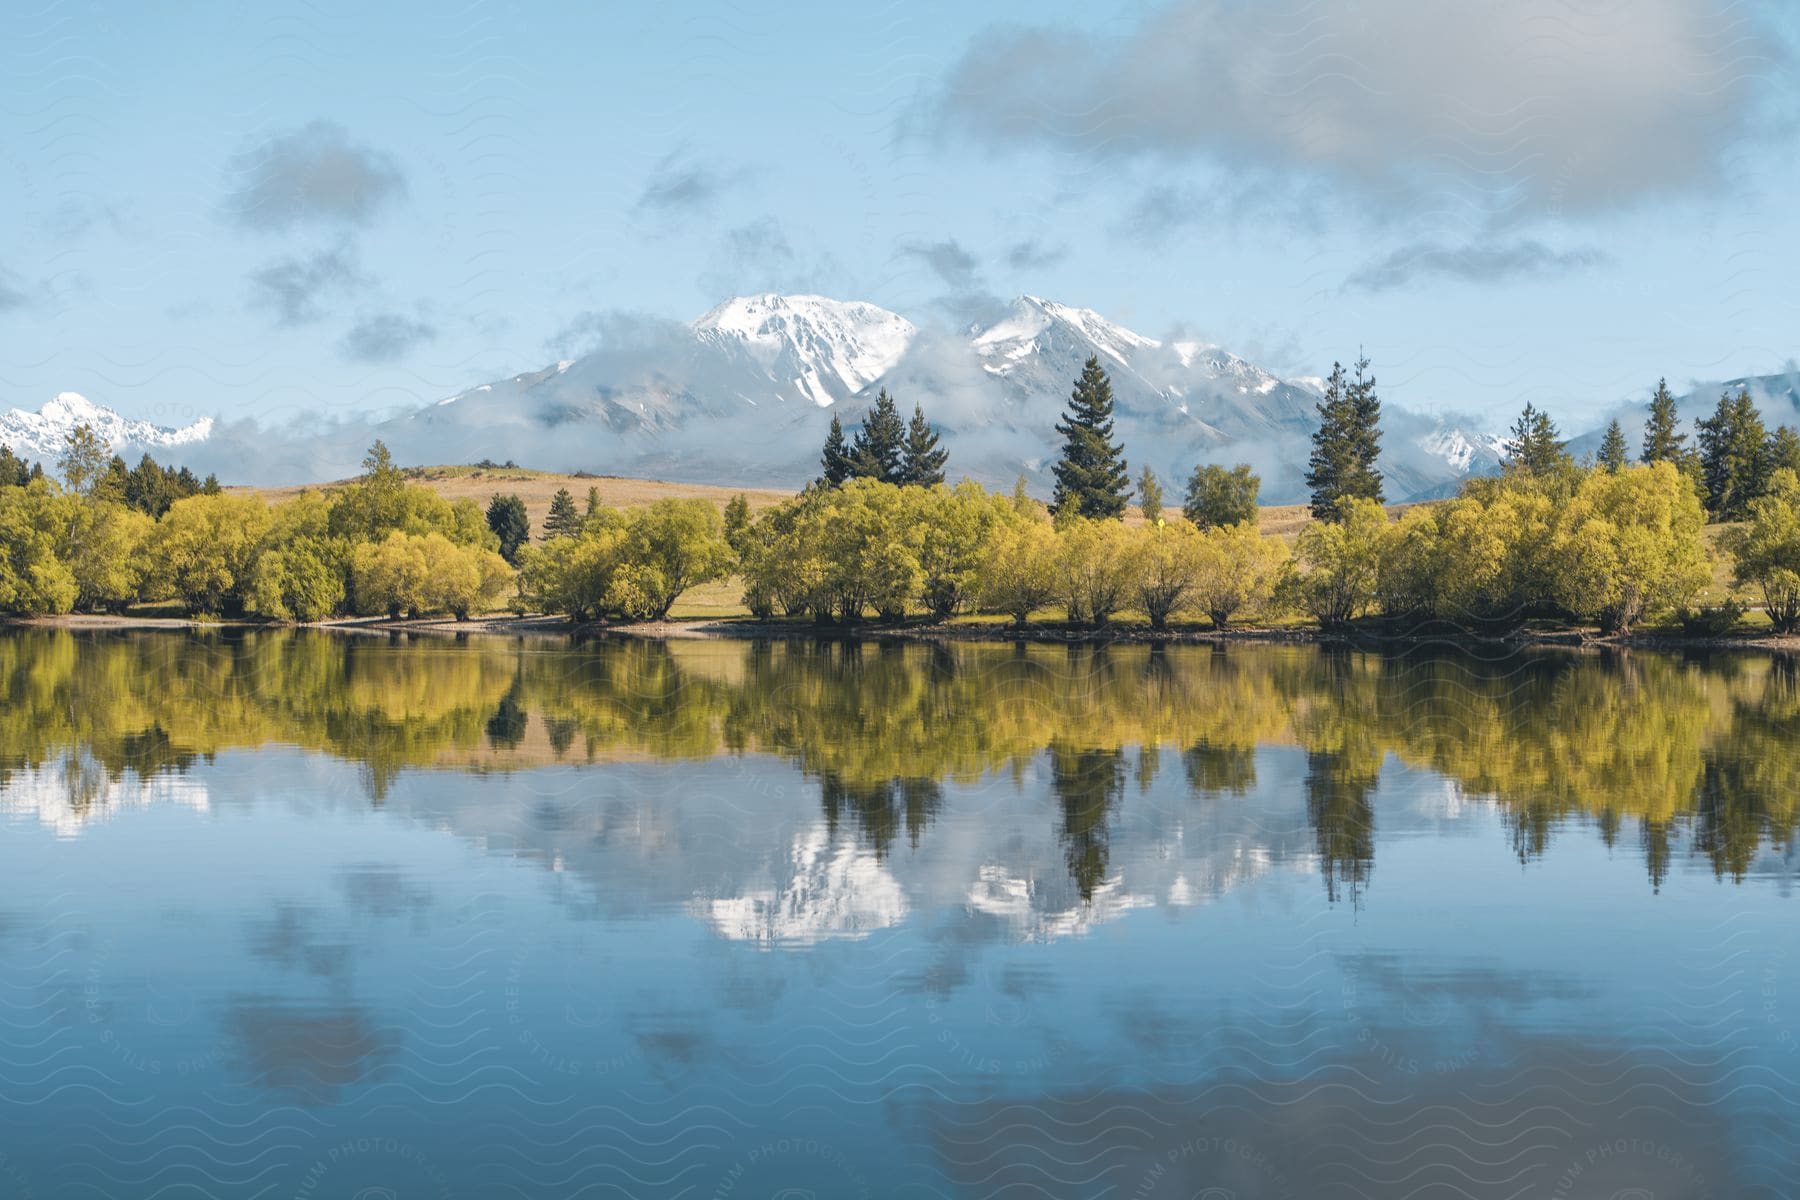 Trees reflecting off of a lake in the foreground surrounded by mountains and a cloudy sky